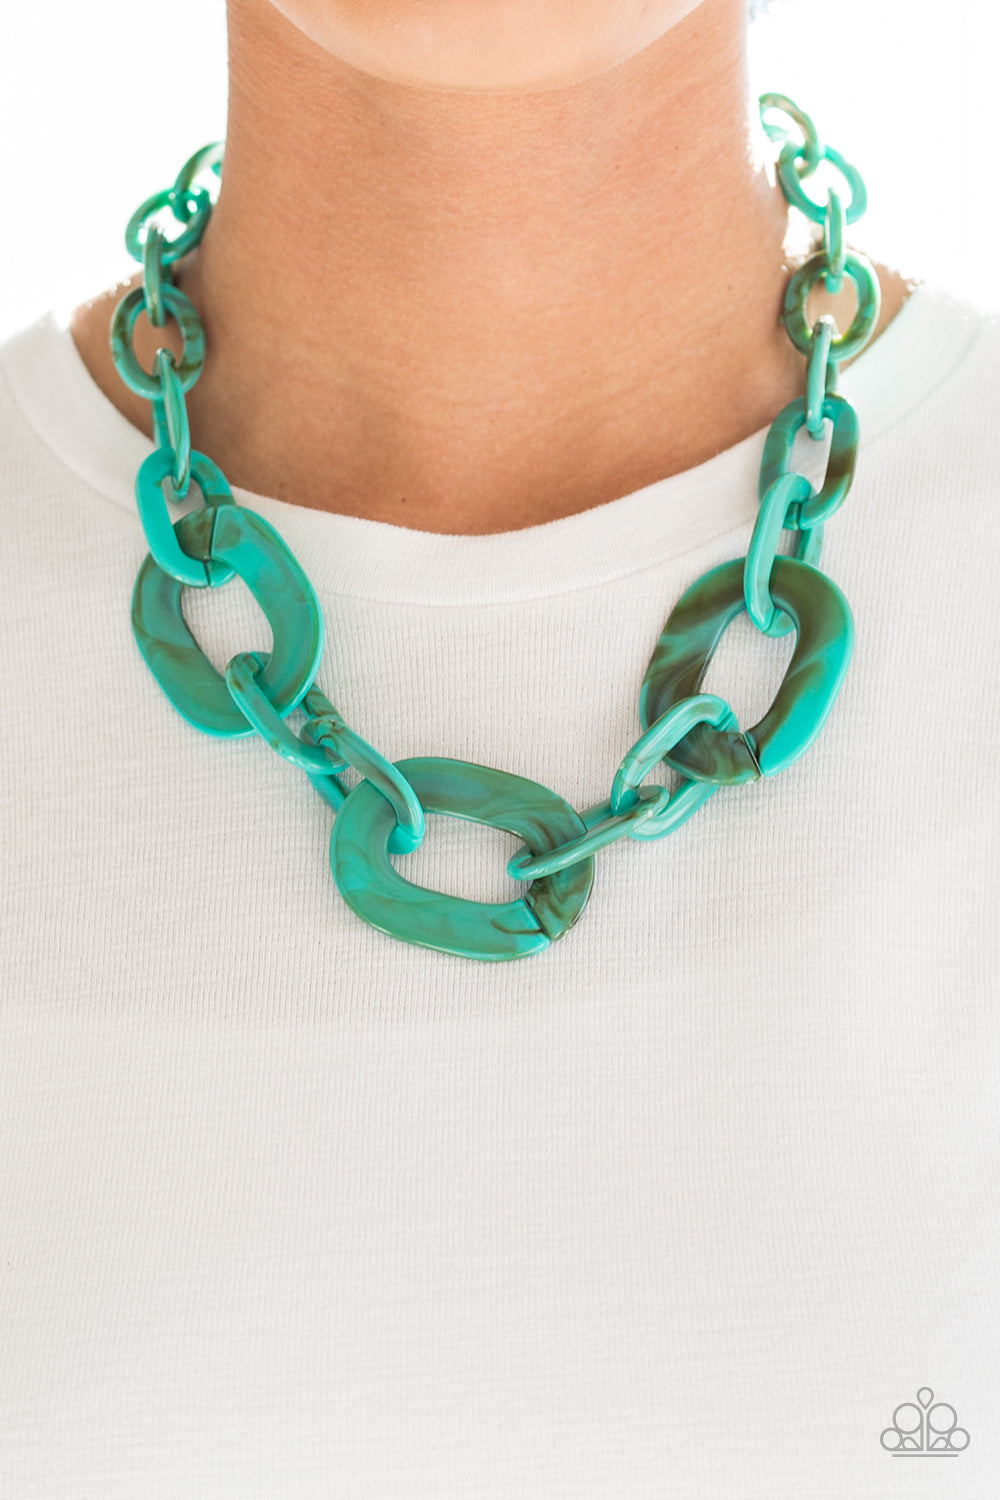 ALL IN-VINCIBLE - BLUE MARBLED ACRYLIC LINKS NECKLACE